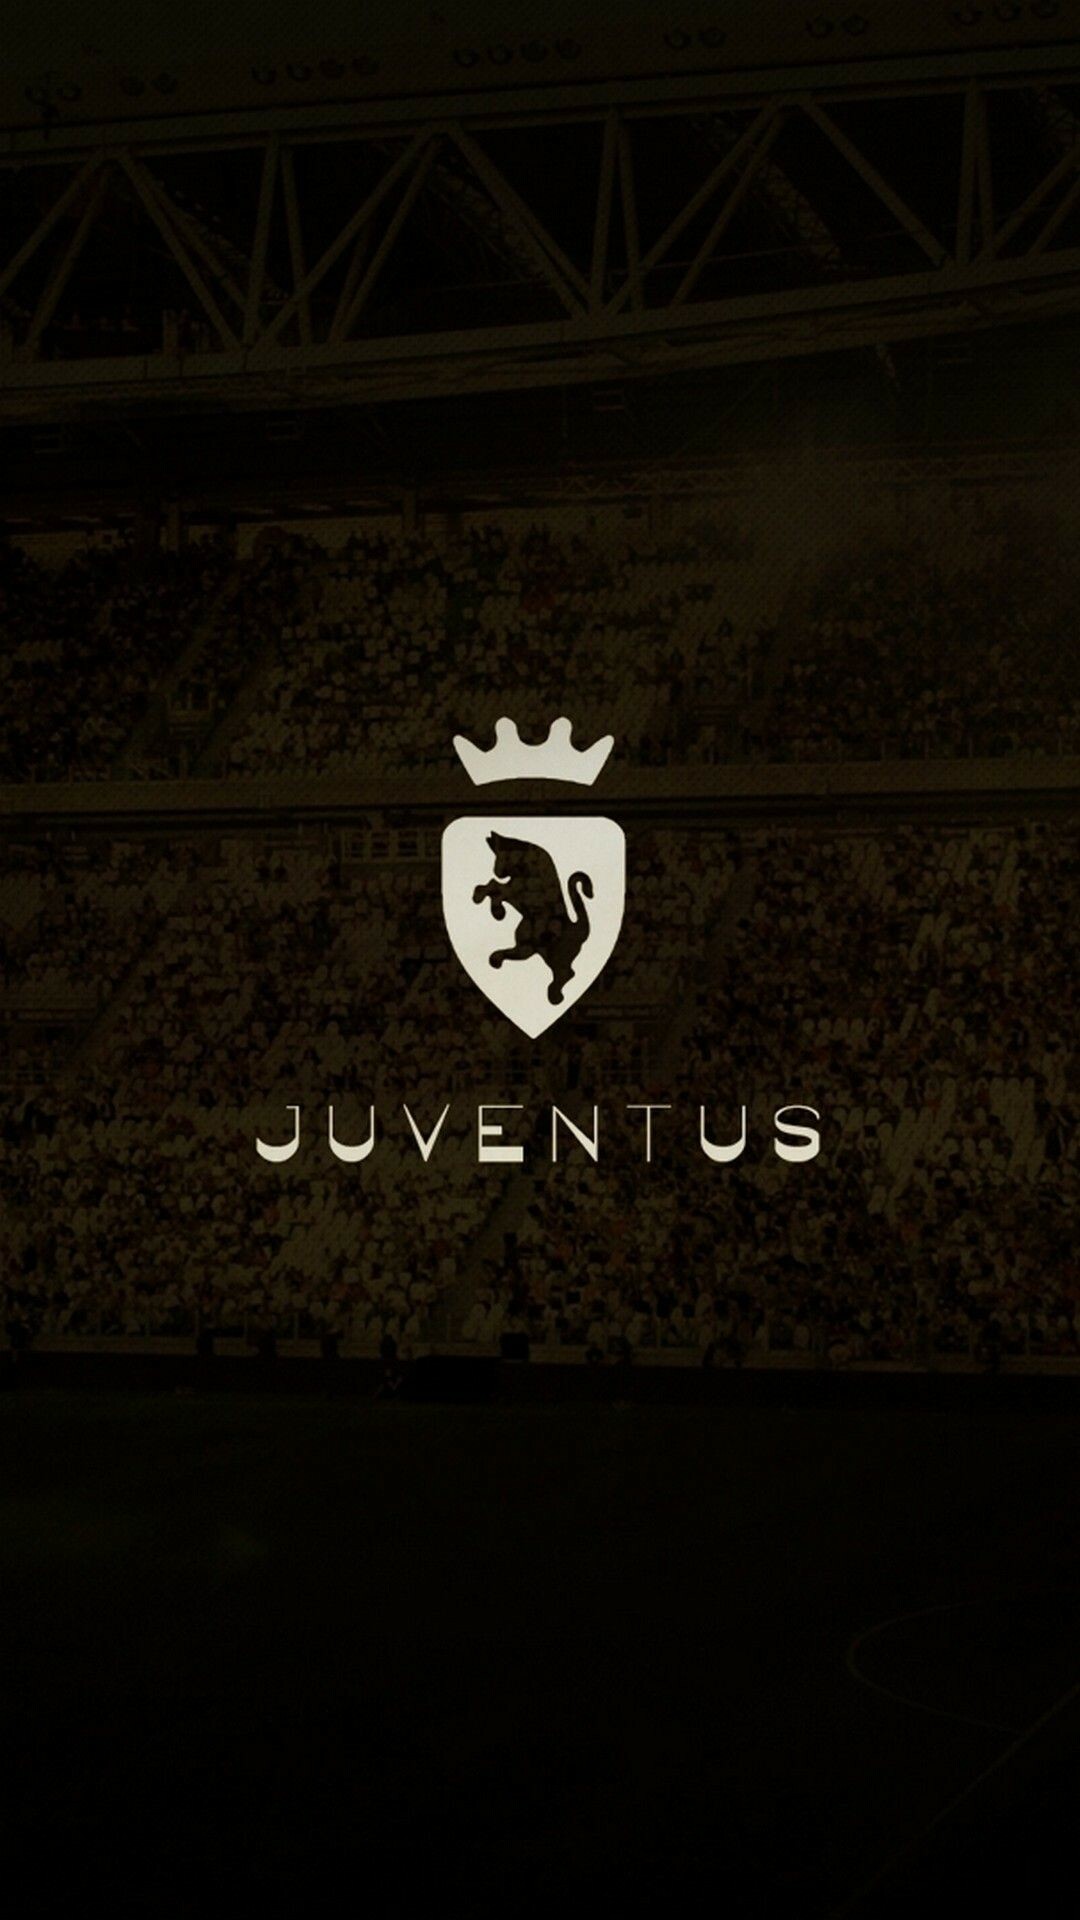 Forza Juve, Juventus wallpapers 2018, Fan's favorite, Iconic moments, 1080x1920 Full HD Handy